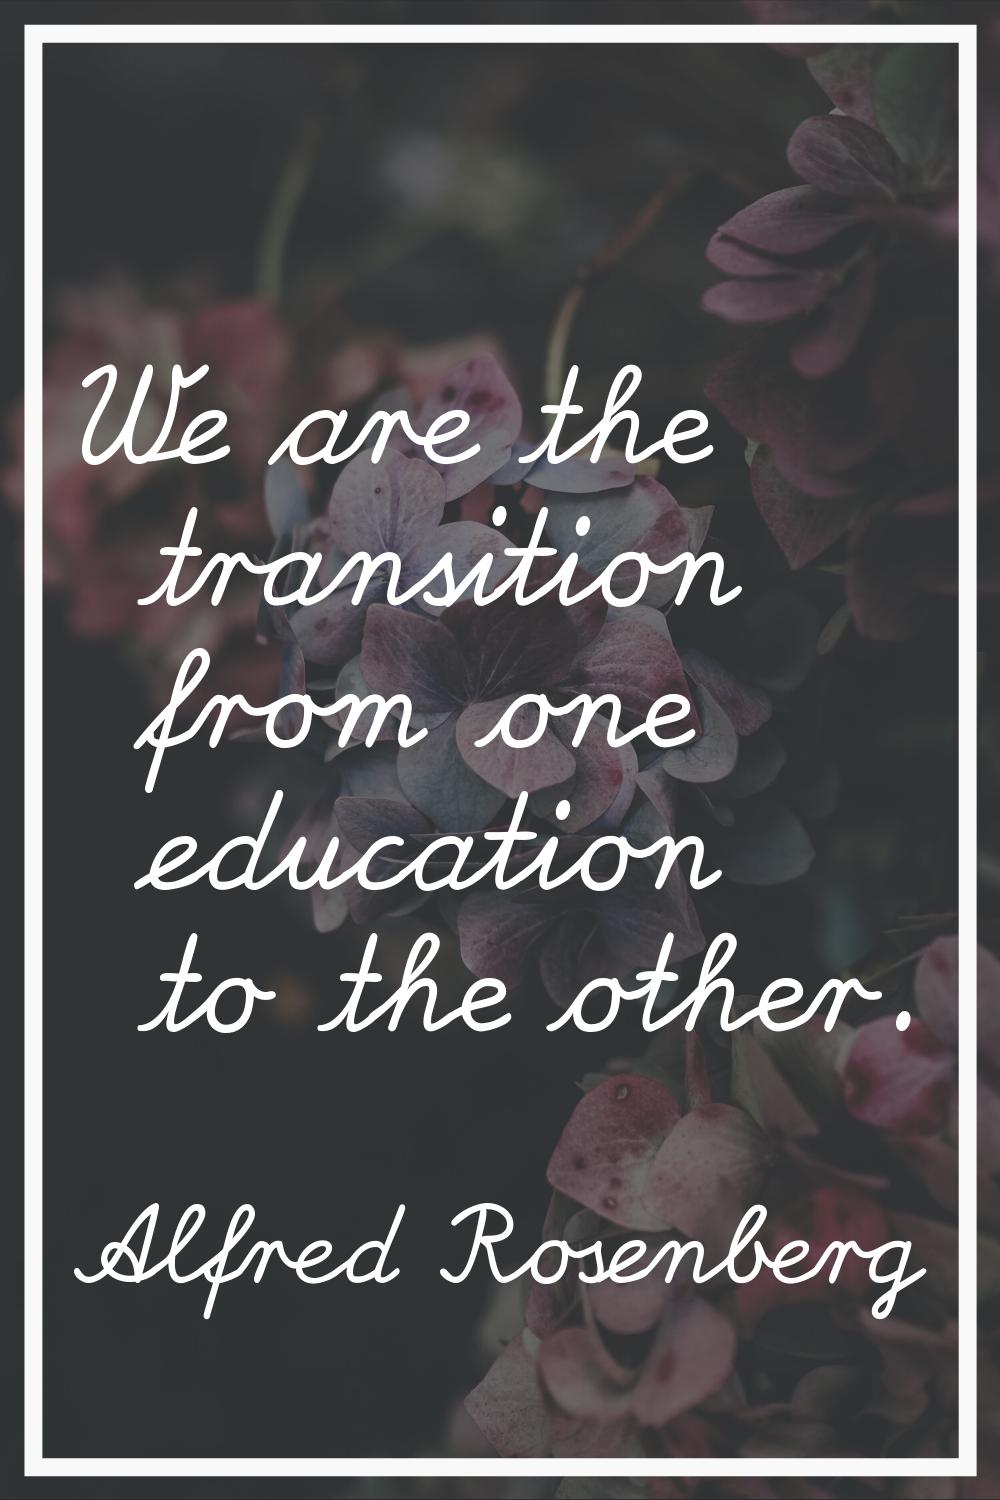 We are the transition from one education to the other.